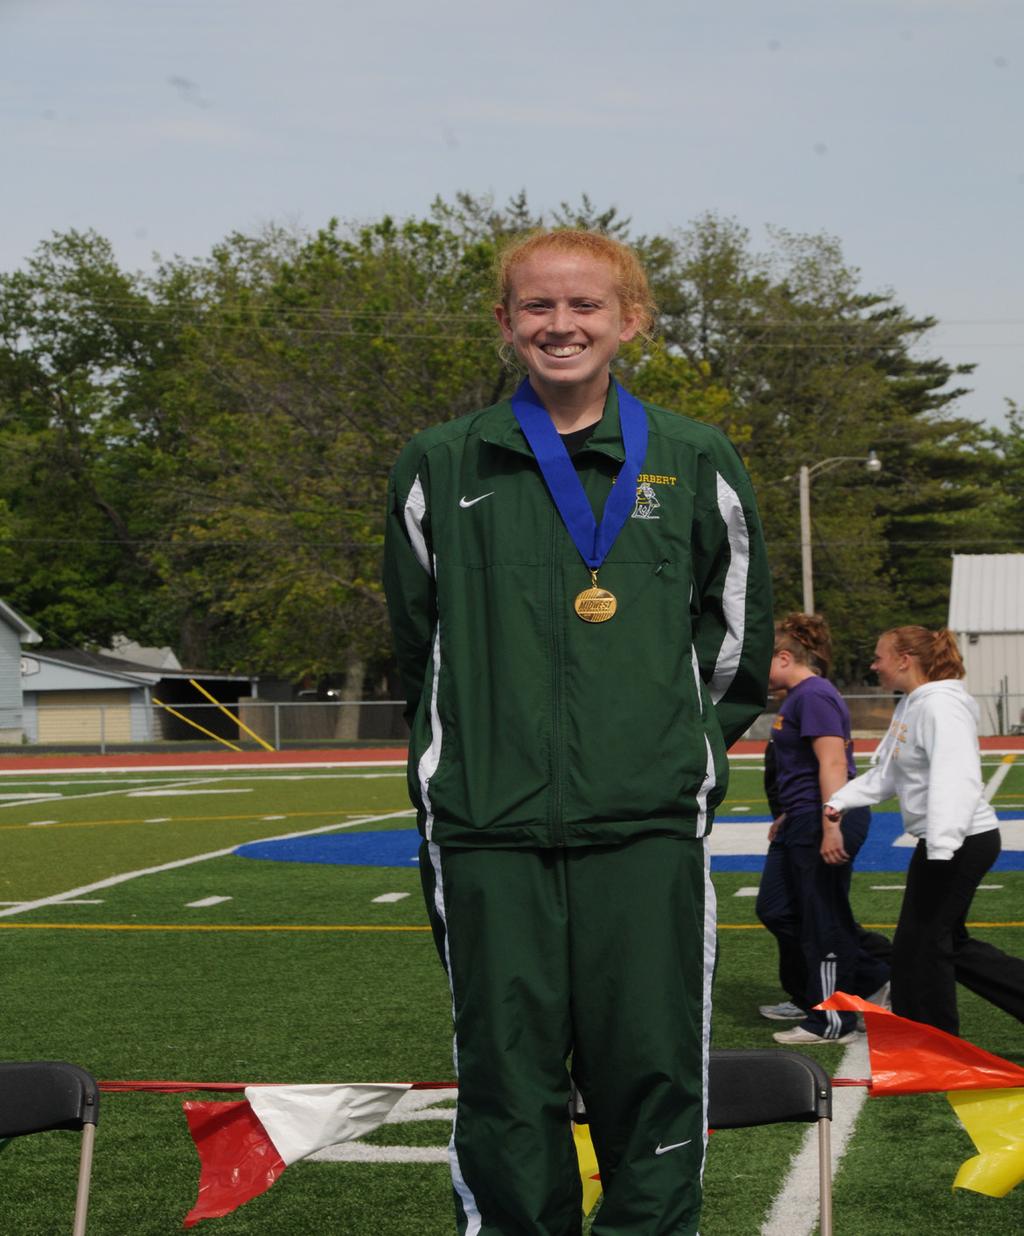 GREEN KNIGHTS ON THE PODIUM Emily